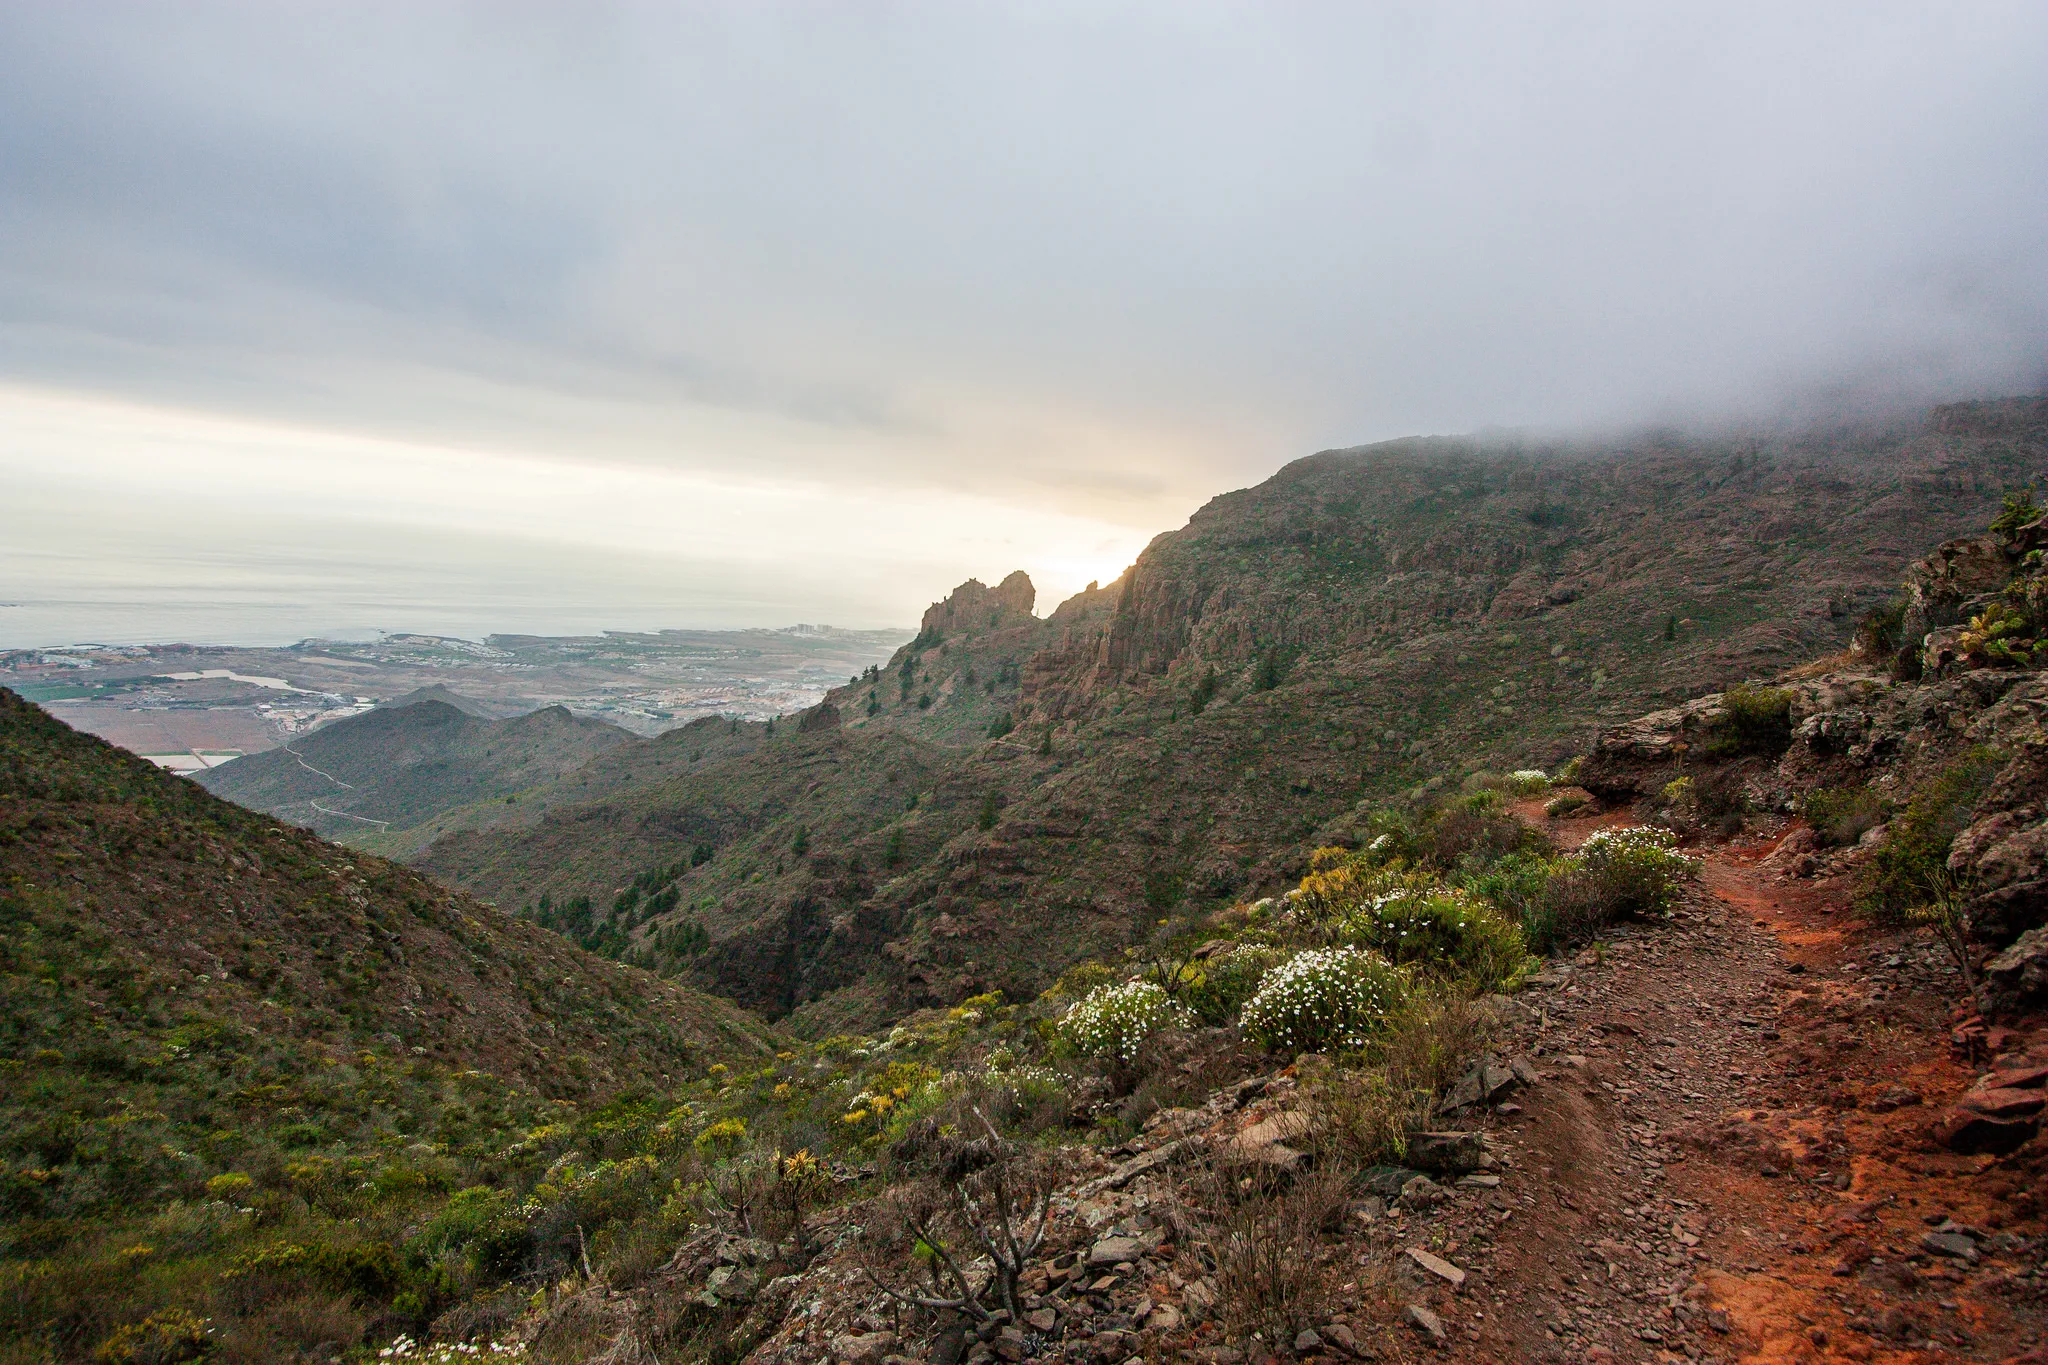 Some views from the path leading towards Roque de los Brezos